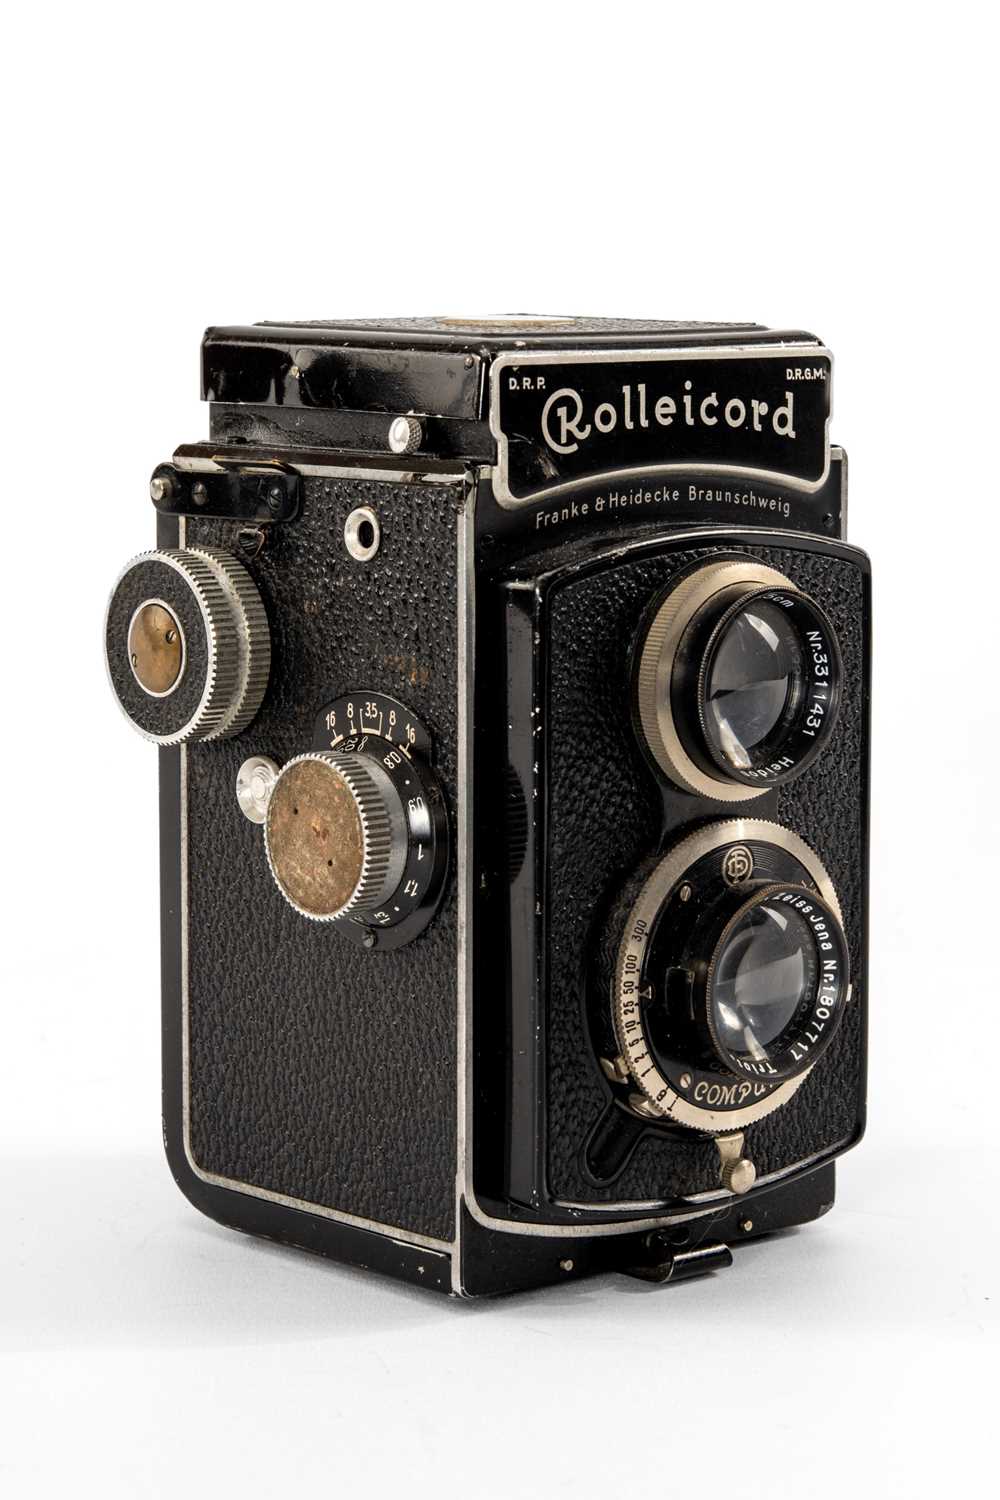 An F&H ROLLEICORD 3.5F MEDIUM FORMAT CAMERA - black, serial no. 3243186, with a Carl Zeiss Jena, - Image 2 of 2